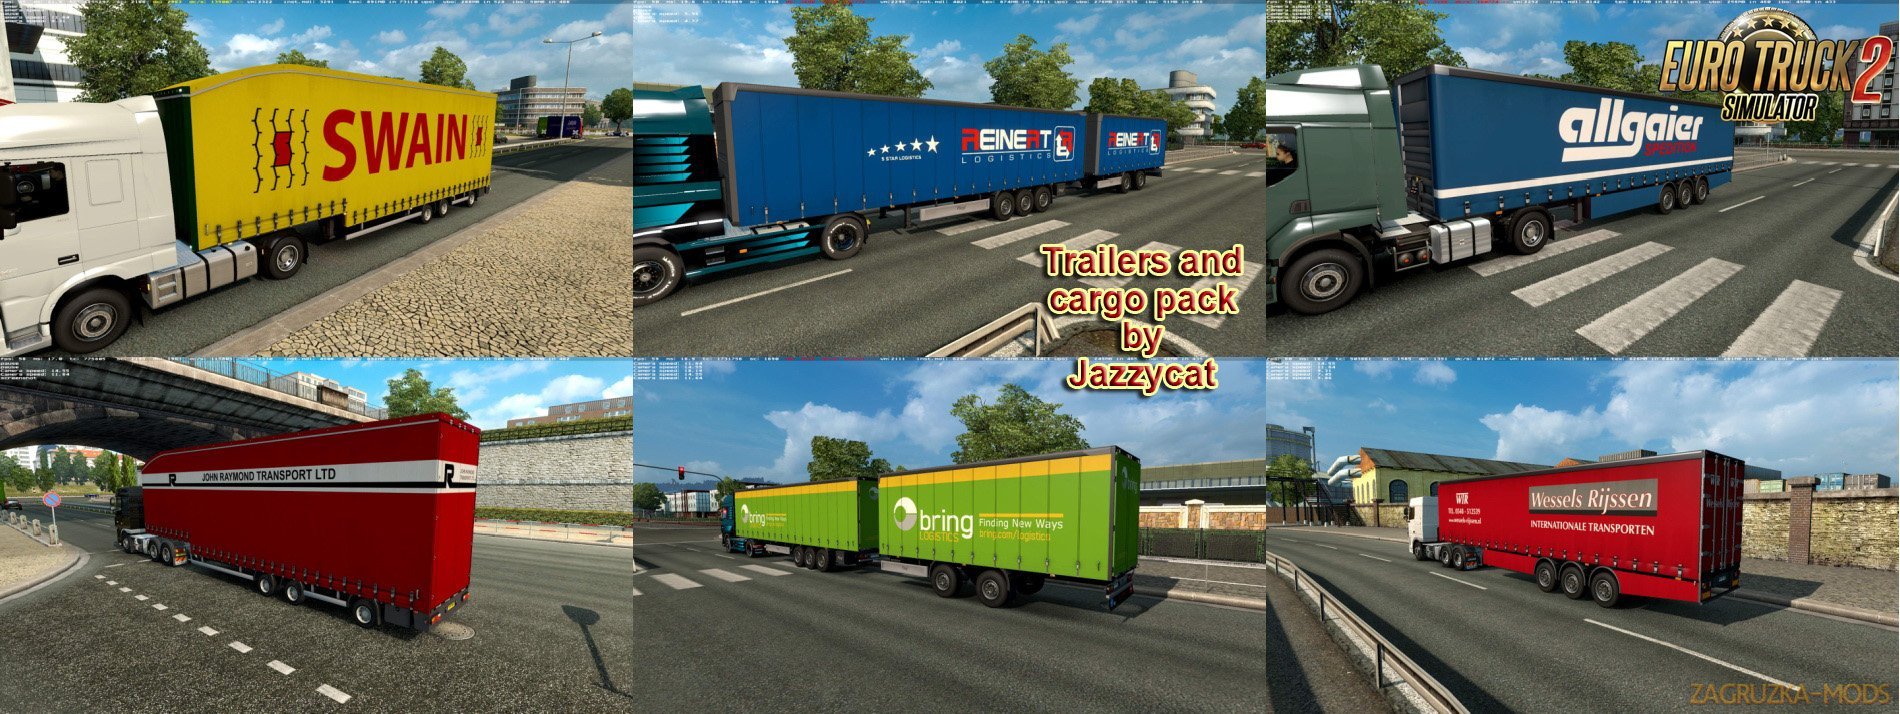 Trailers and Cargo Pack v5.7 by Jazzycat